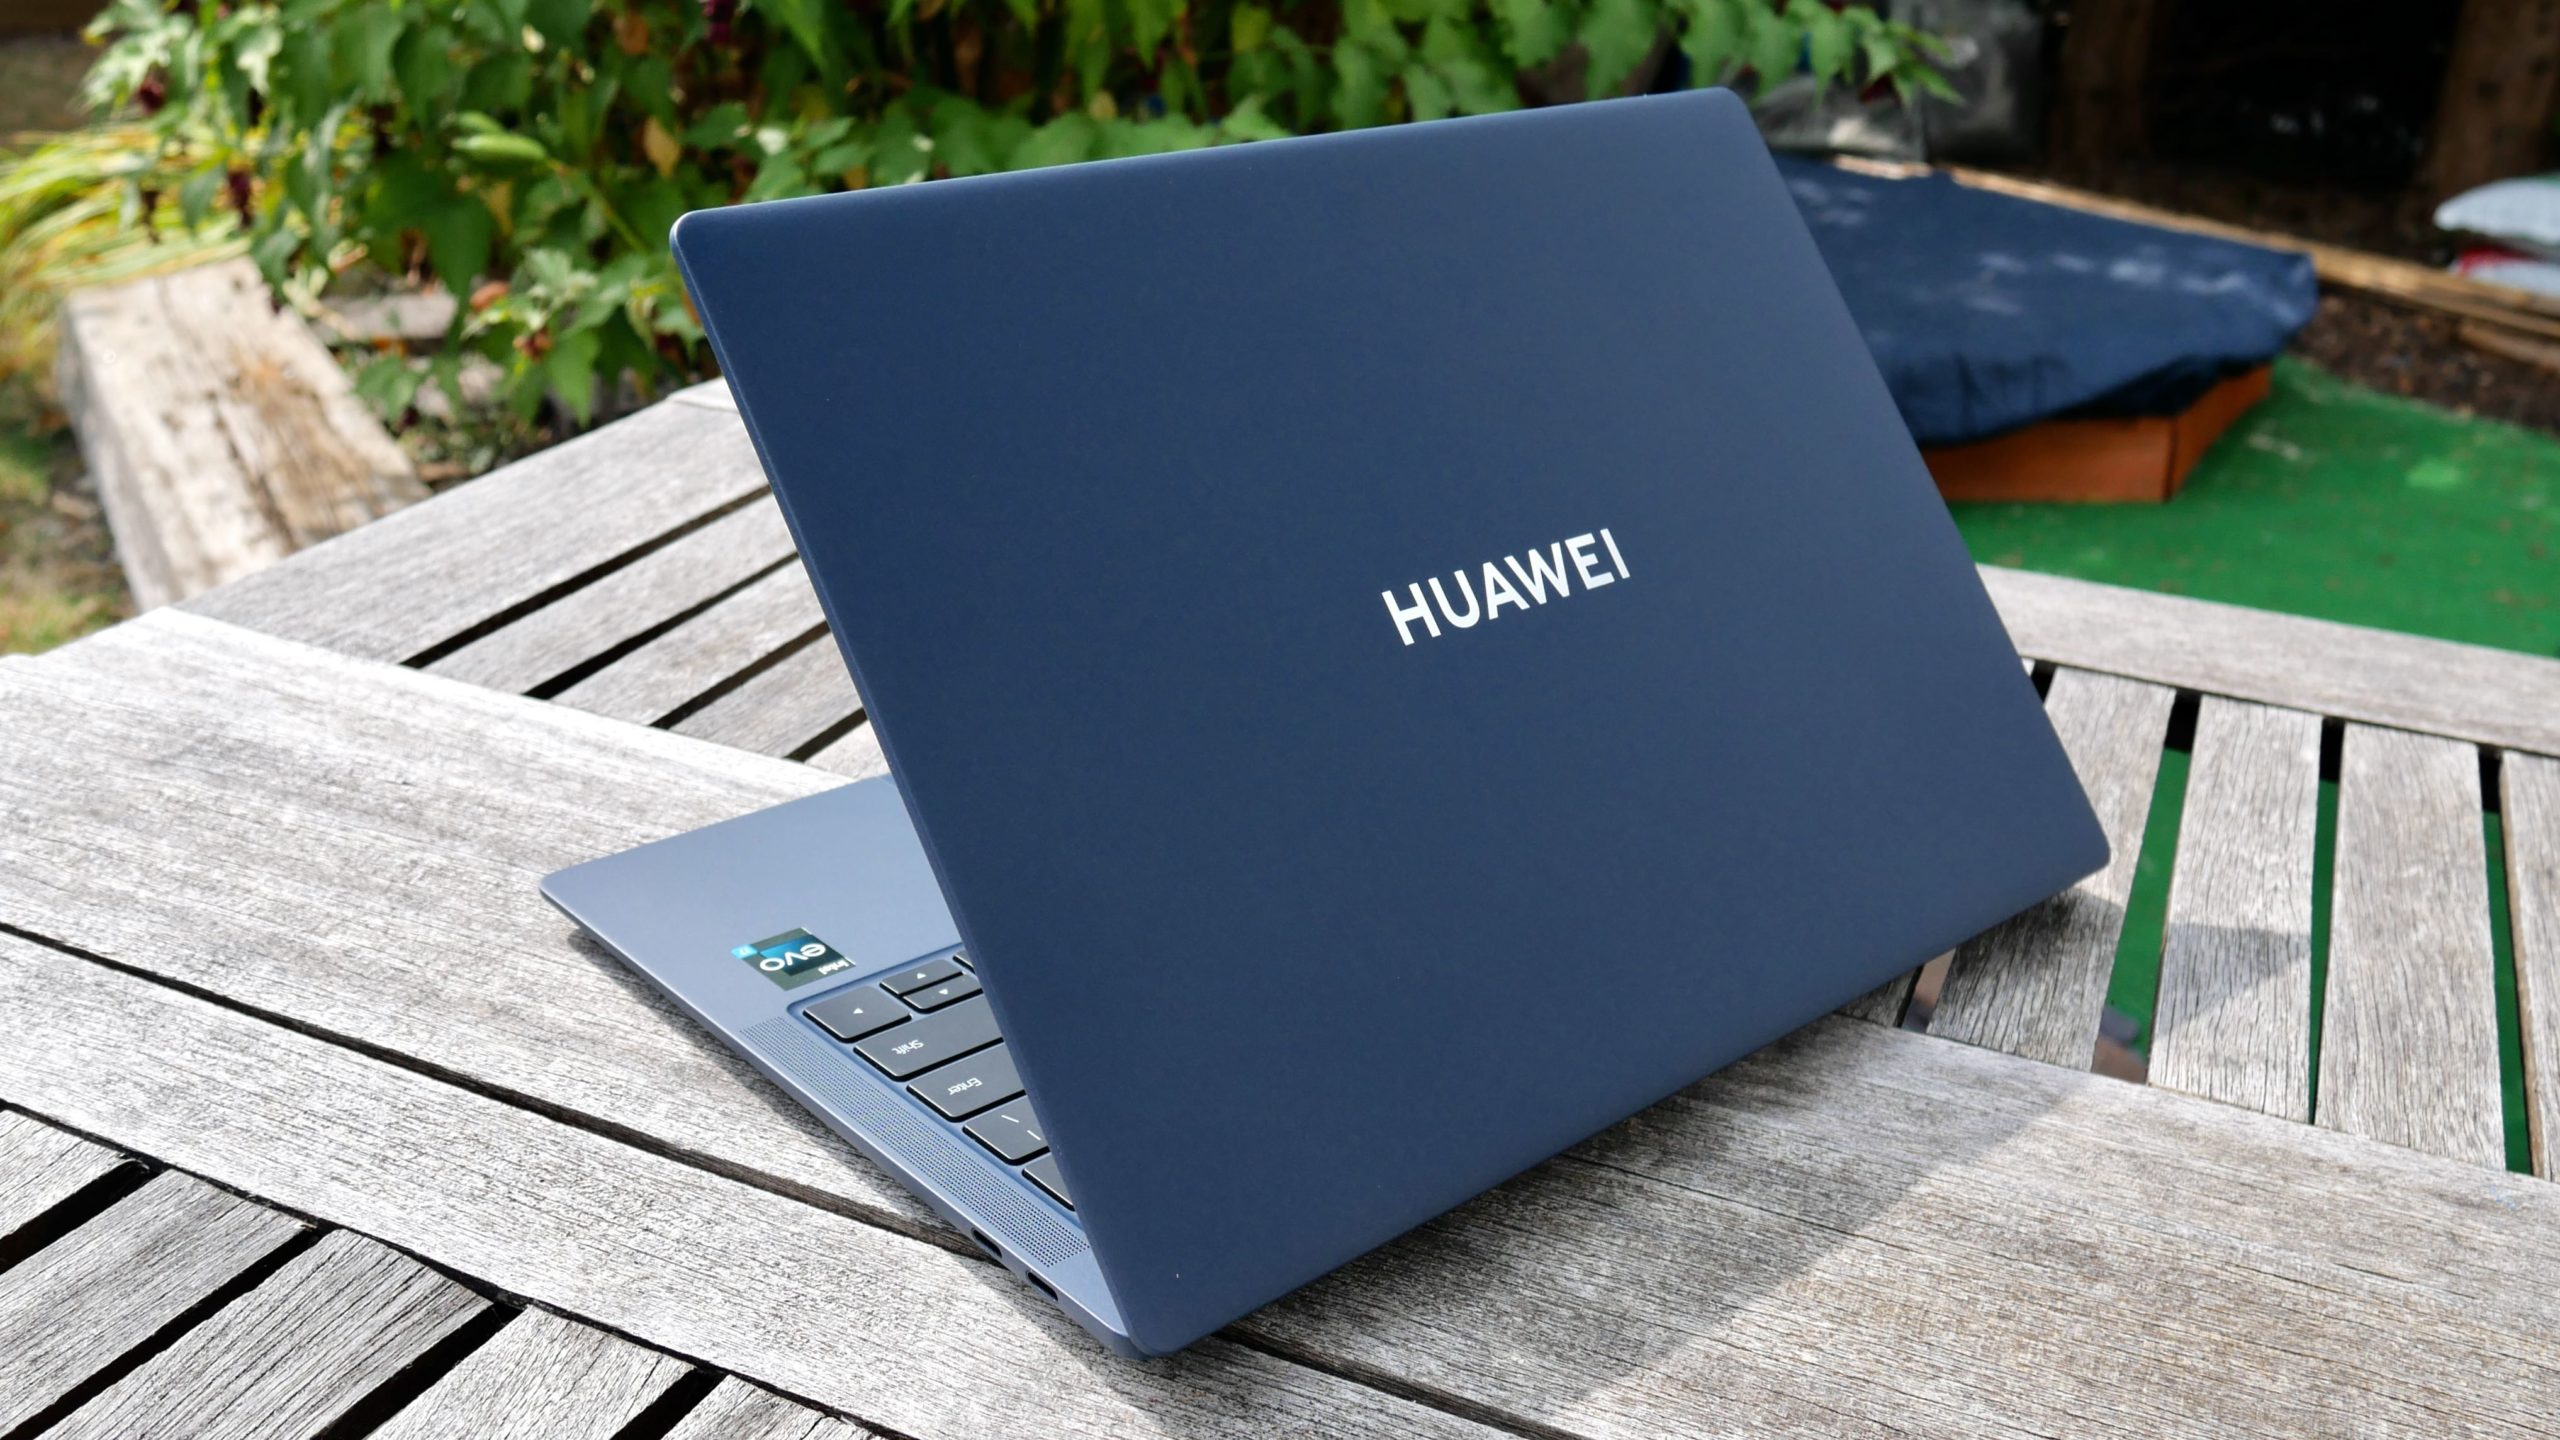 The new and improved Matebook X Pro fixes Huawei’s silliest laptop problem